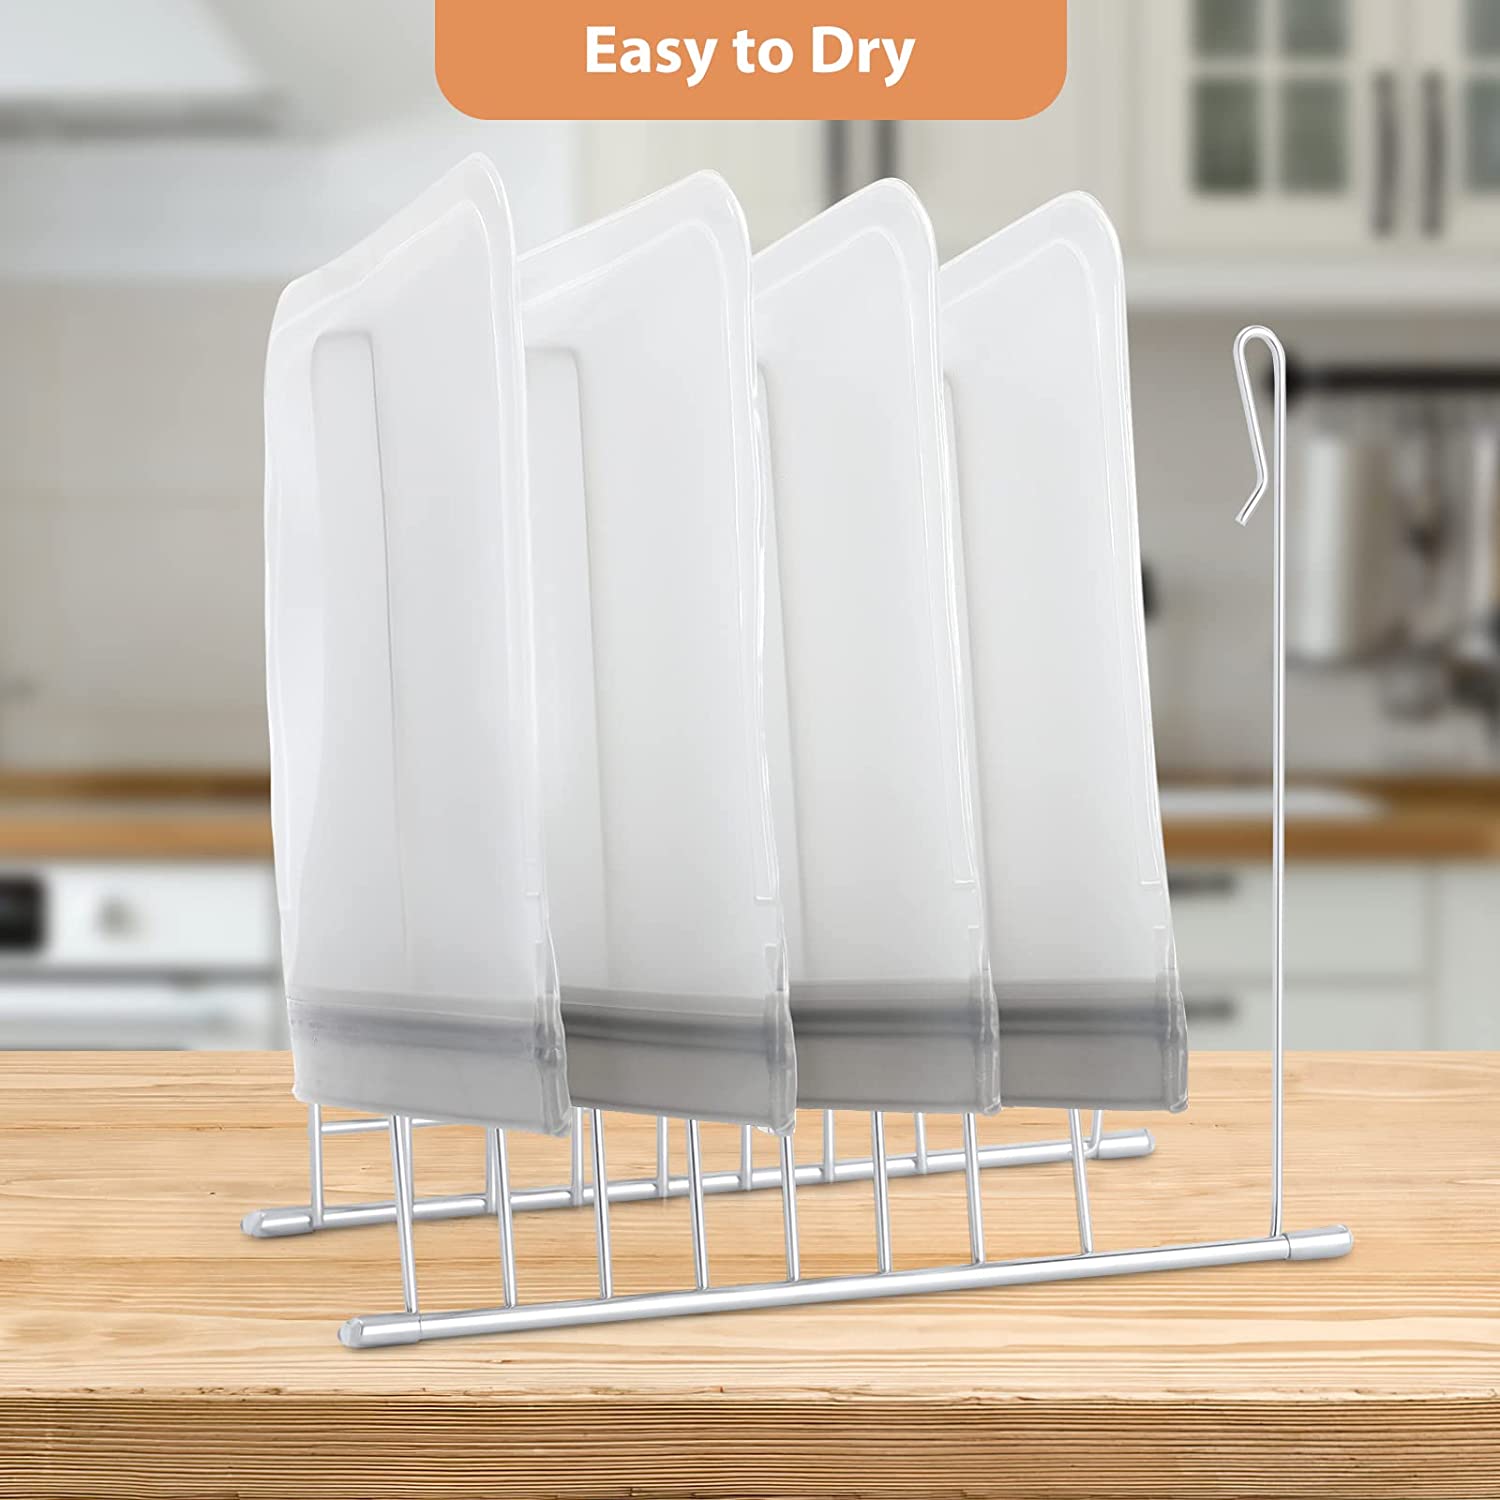  Lerine Reusable Food Storage Bags Drying Rack, Stainless Stand  Plastic Bag Drying Rack with Baggy Rack, Easy to Dry Silicone Bags &  Hands-free to Pour Leftovers, Sauce with No Spills